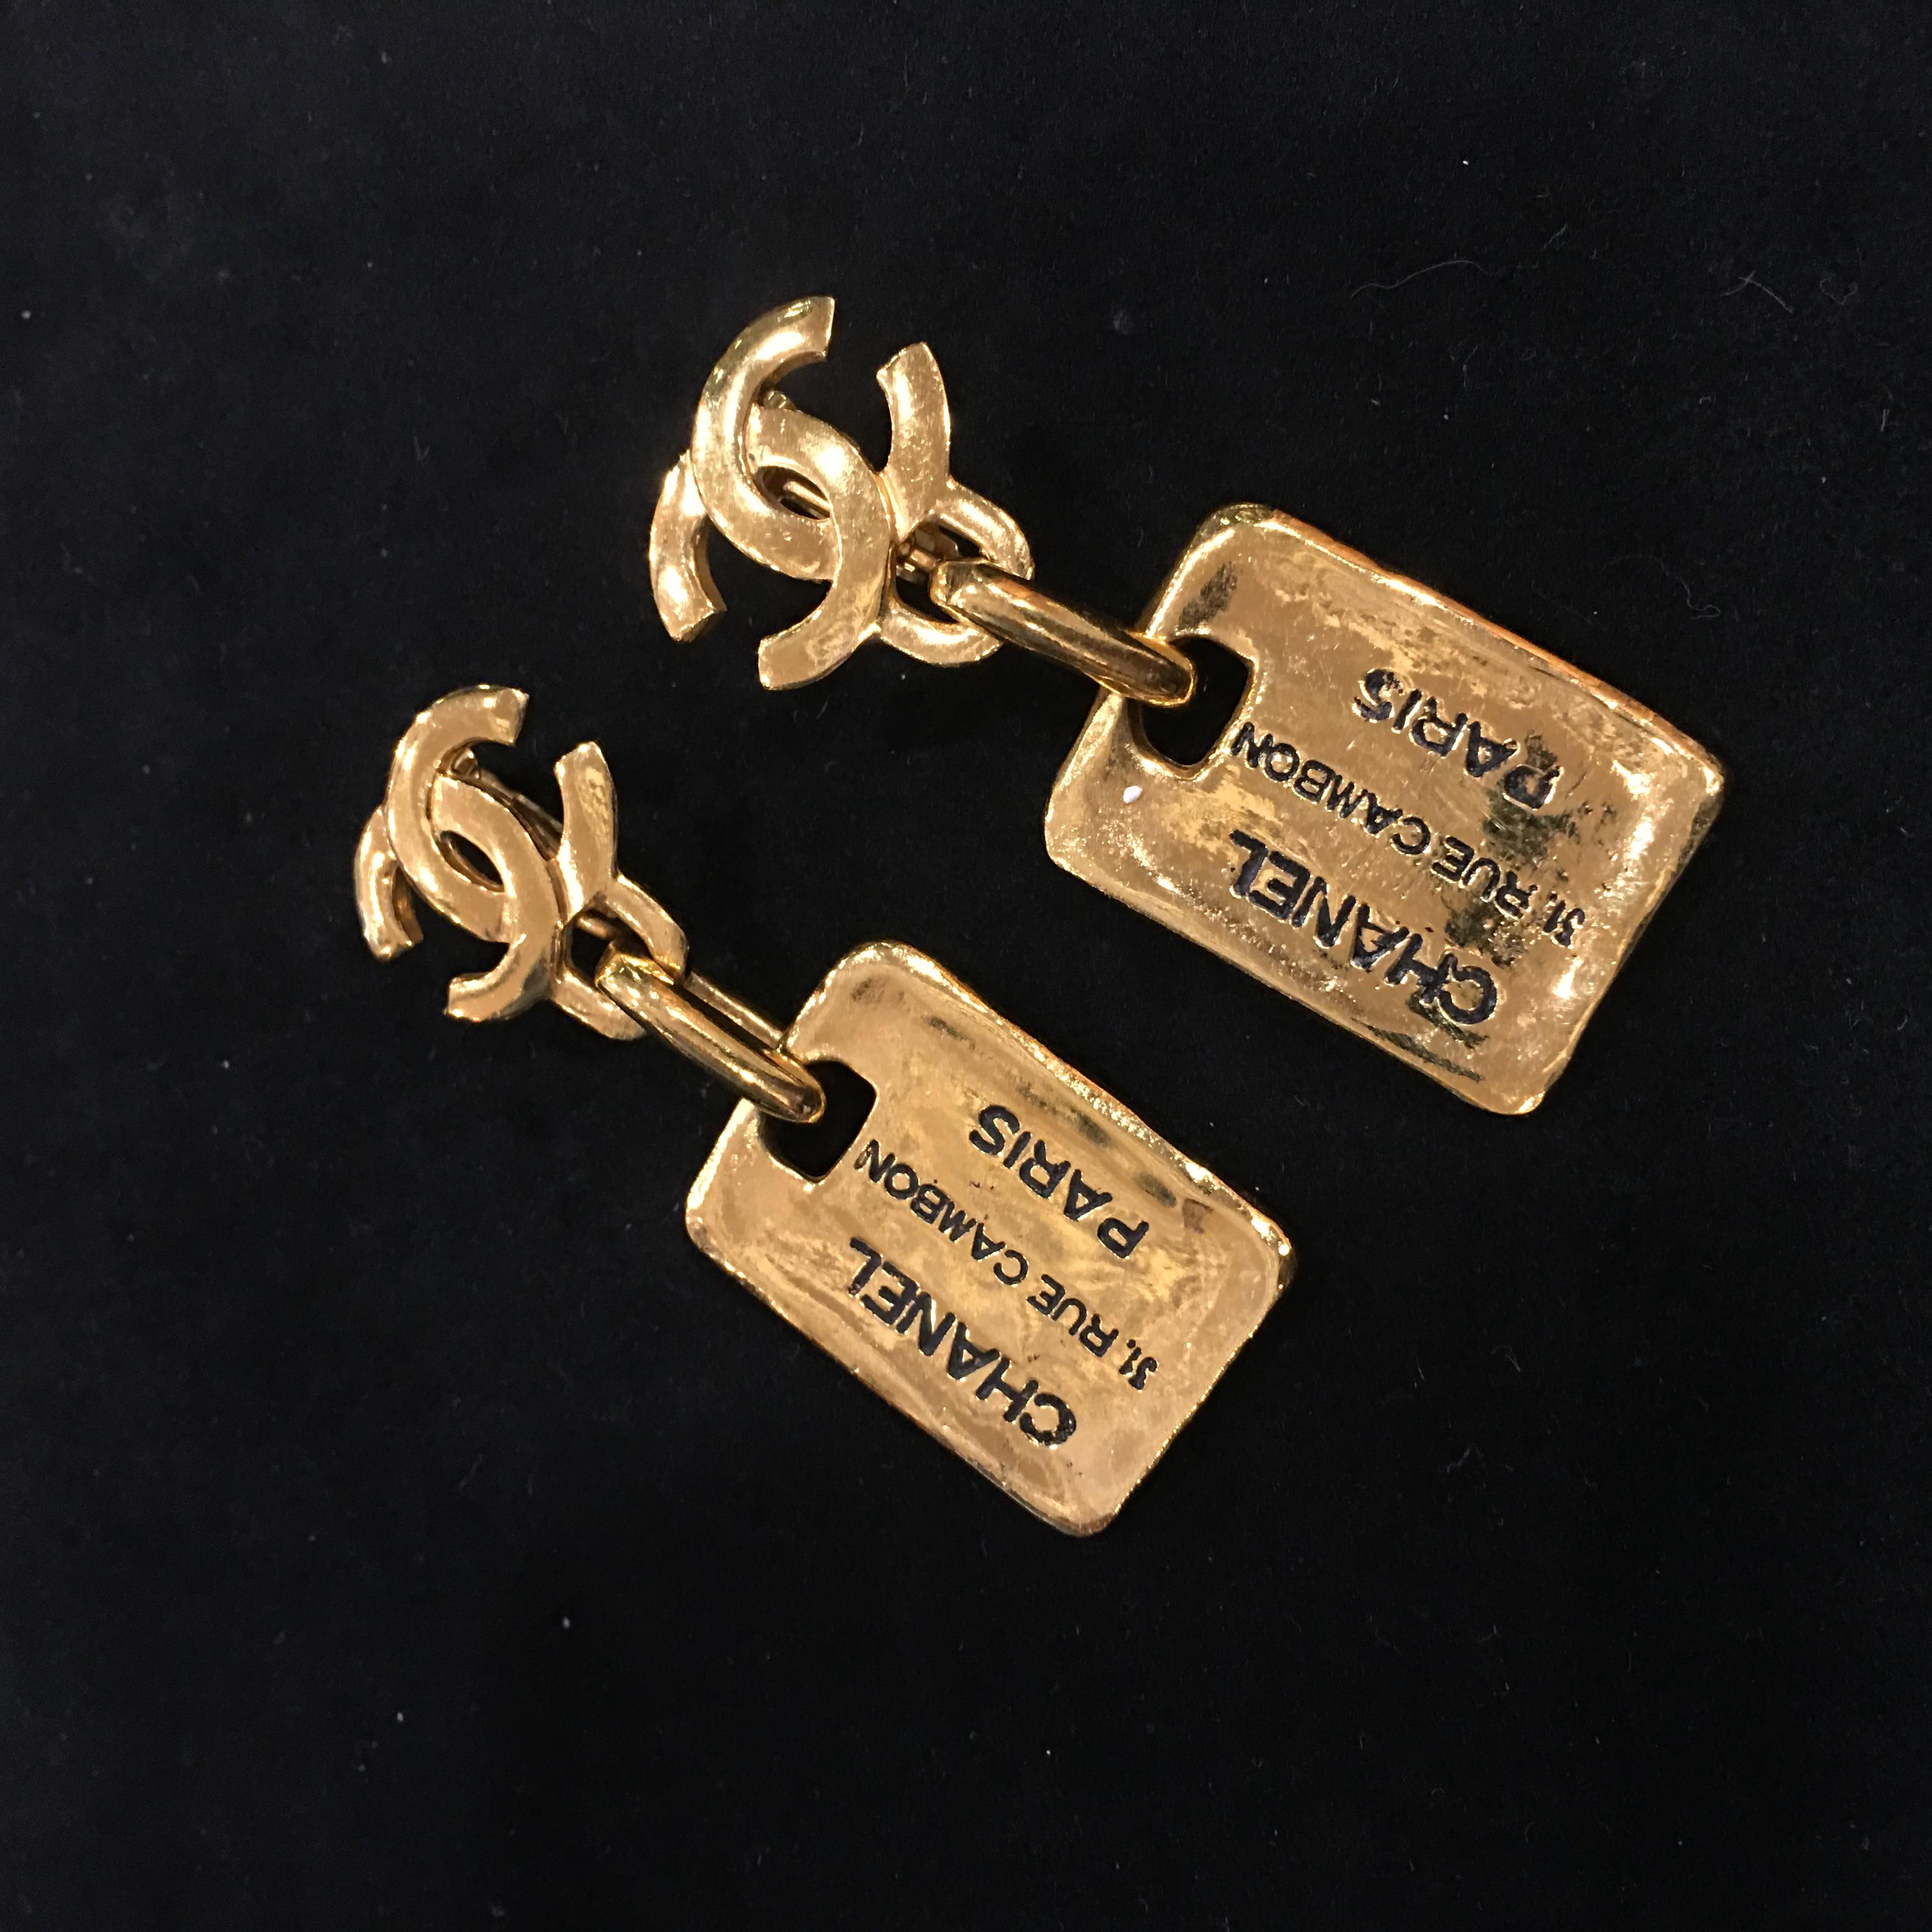 Brand: Chanel
Reference: JW329
Length of Earring: 5.5cm x 2.0cm
Material: Gilt Metal
Year: 1980’s
Made in France

Please Note: the jewelries are guarantee 100% authentic pre-owned therefore might have signs of tarnish or oxidation , please view